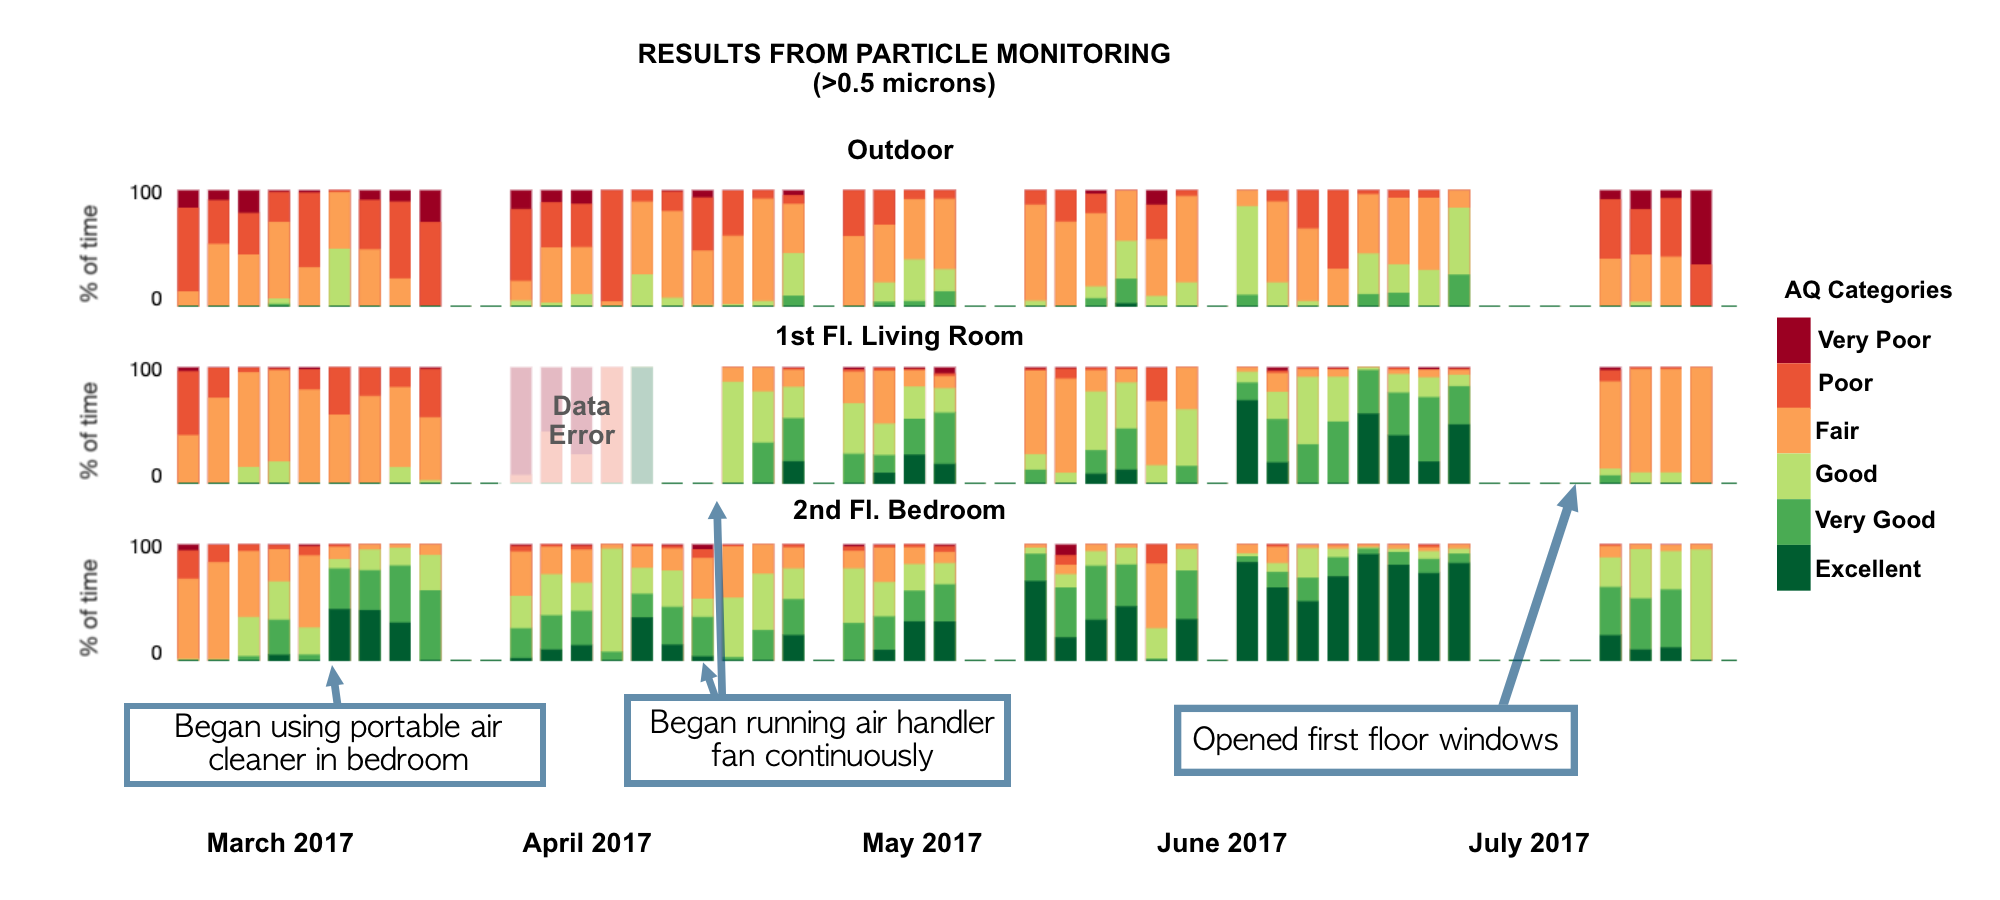 Results from particle monitoring data March 2017 to July 2017